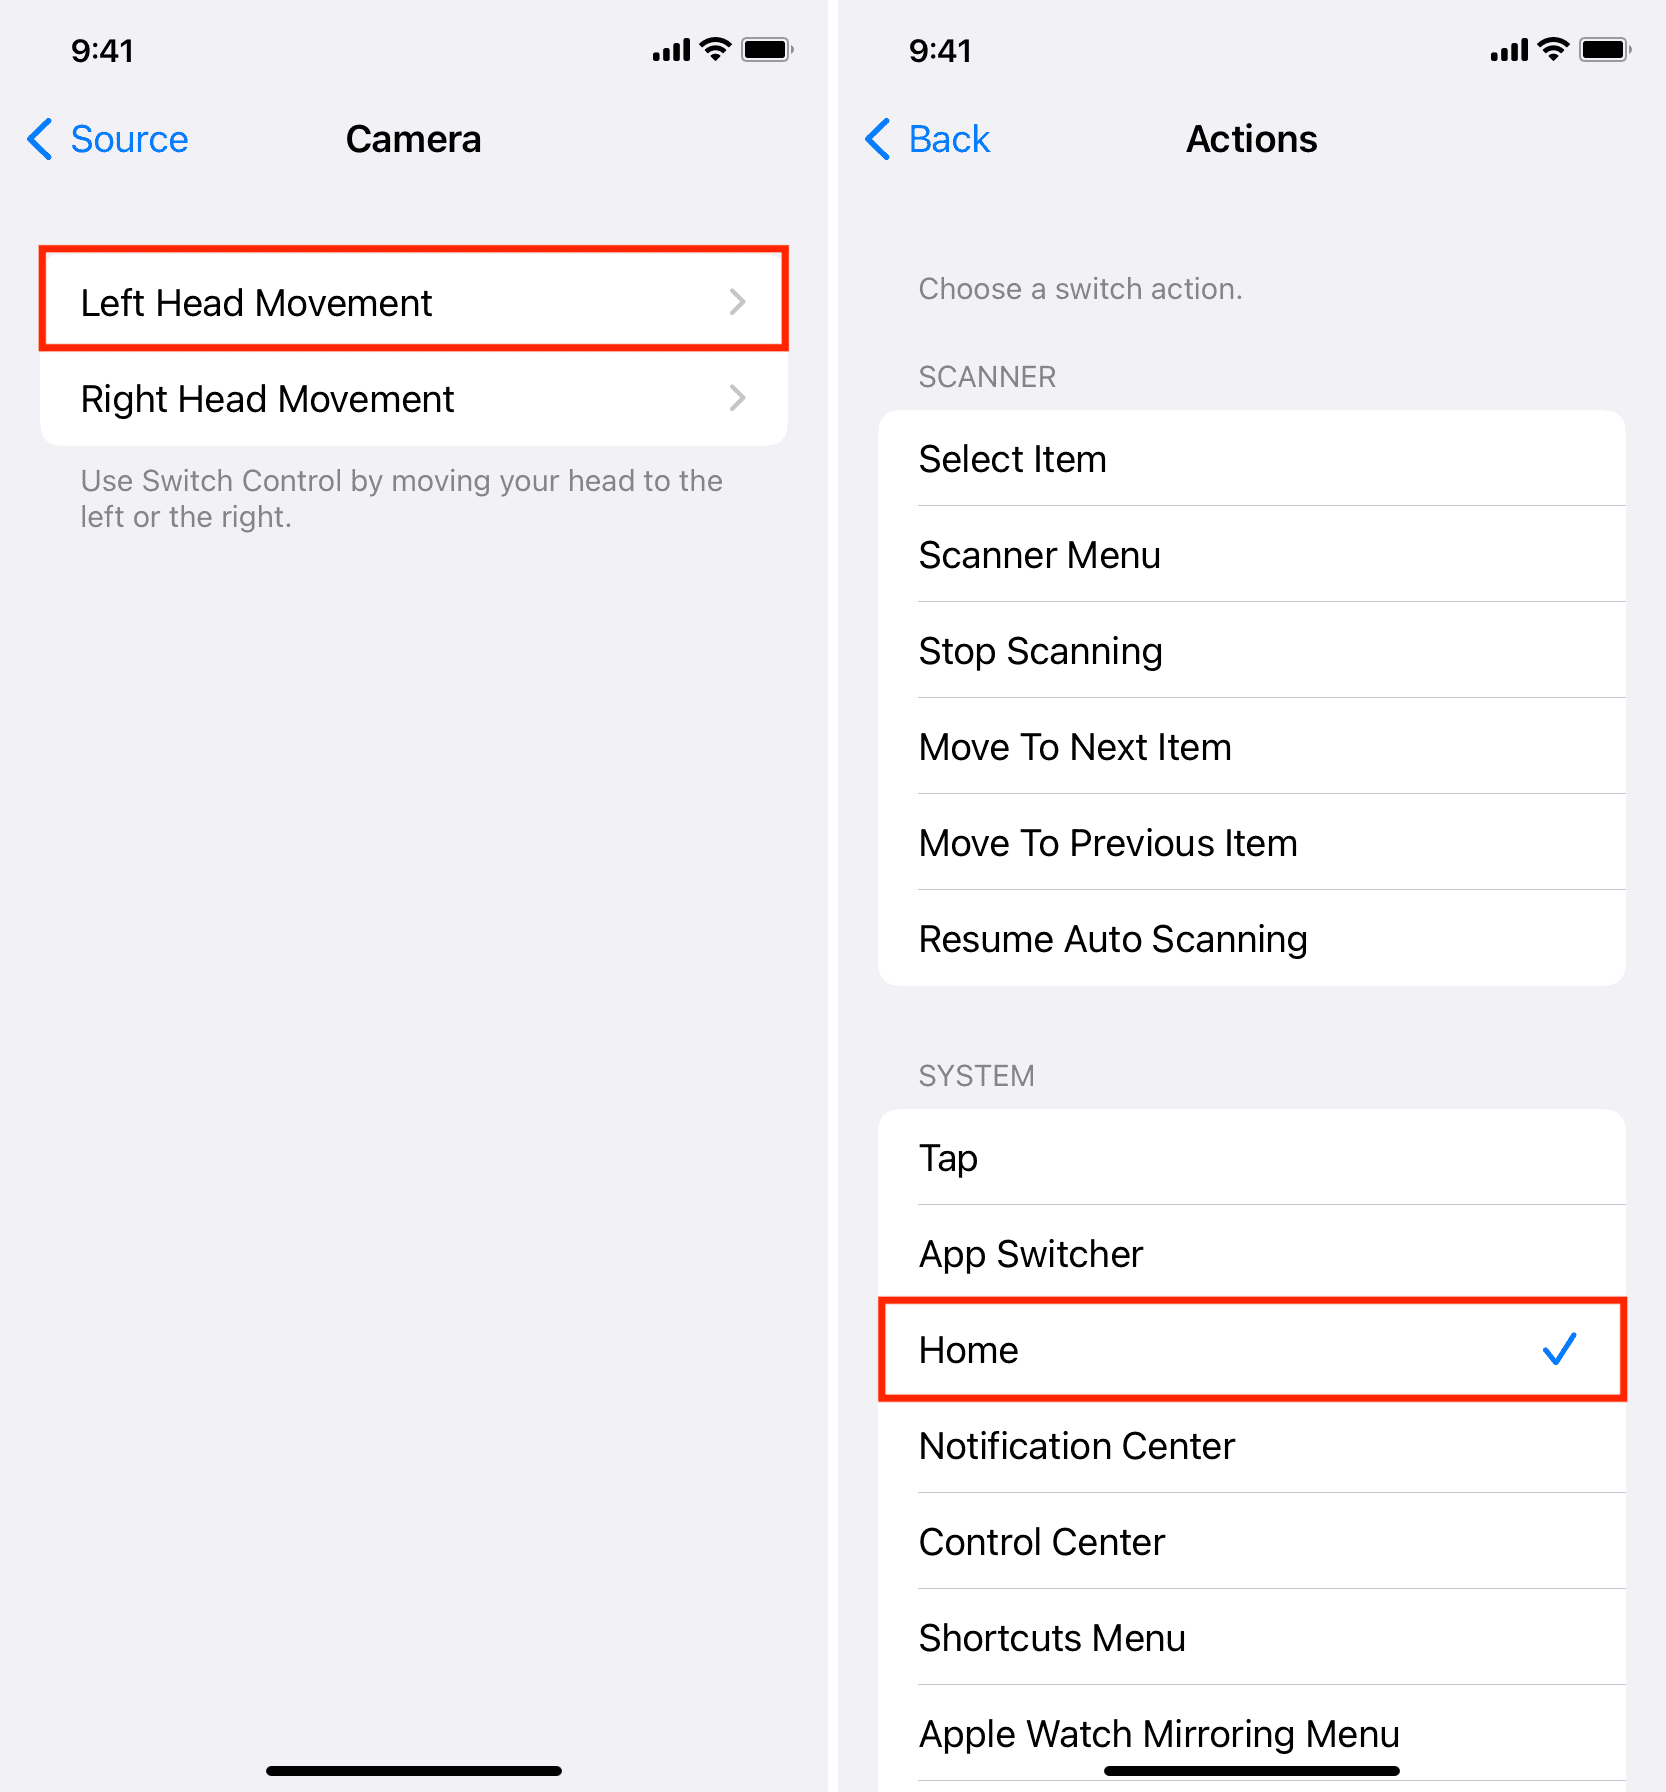 Set left head movement to go home in iPhone accessibility switch control settings